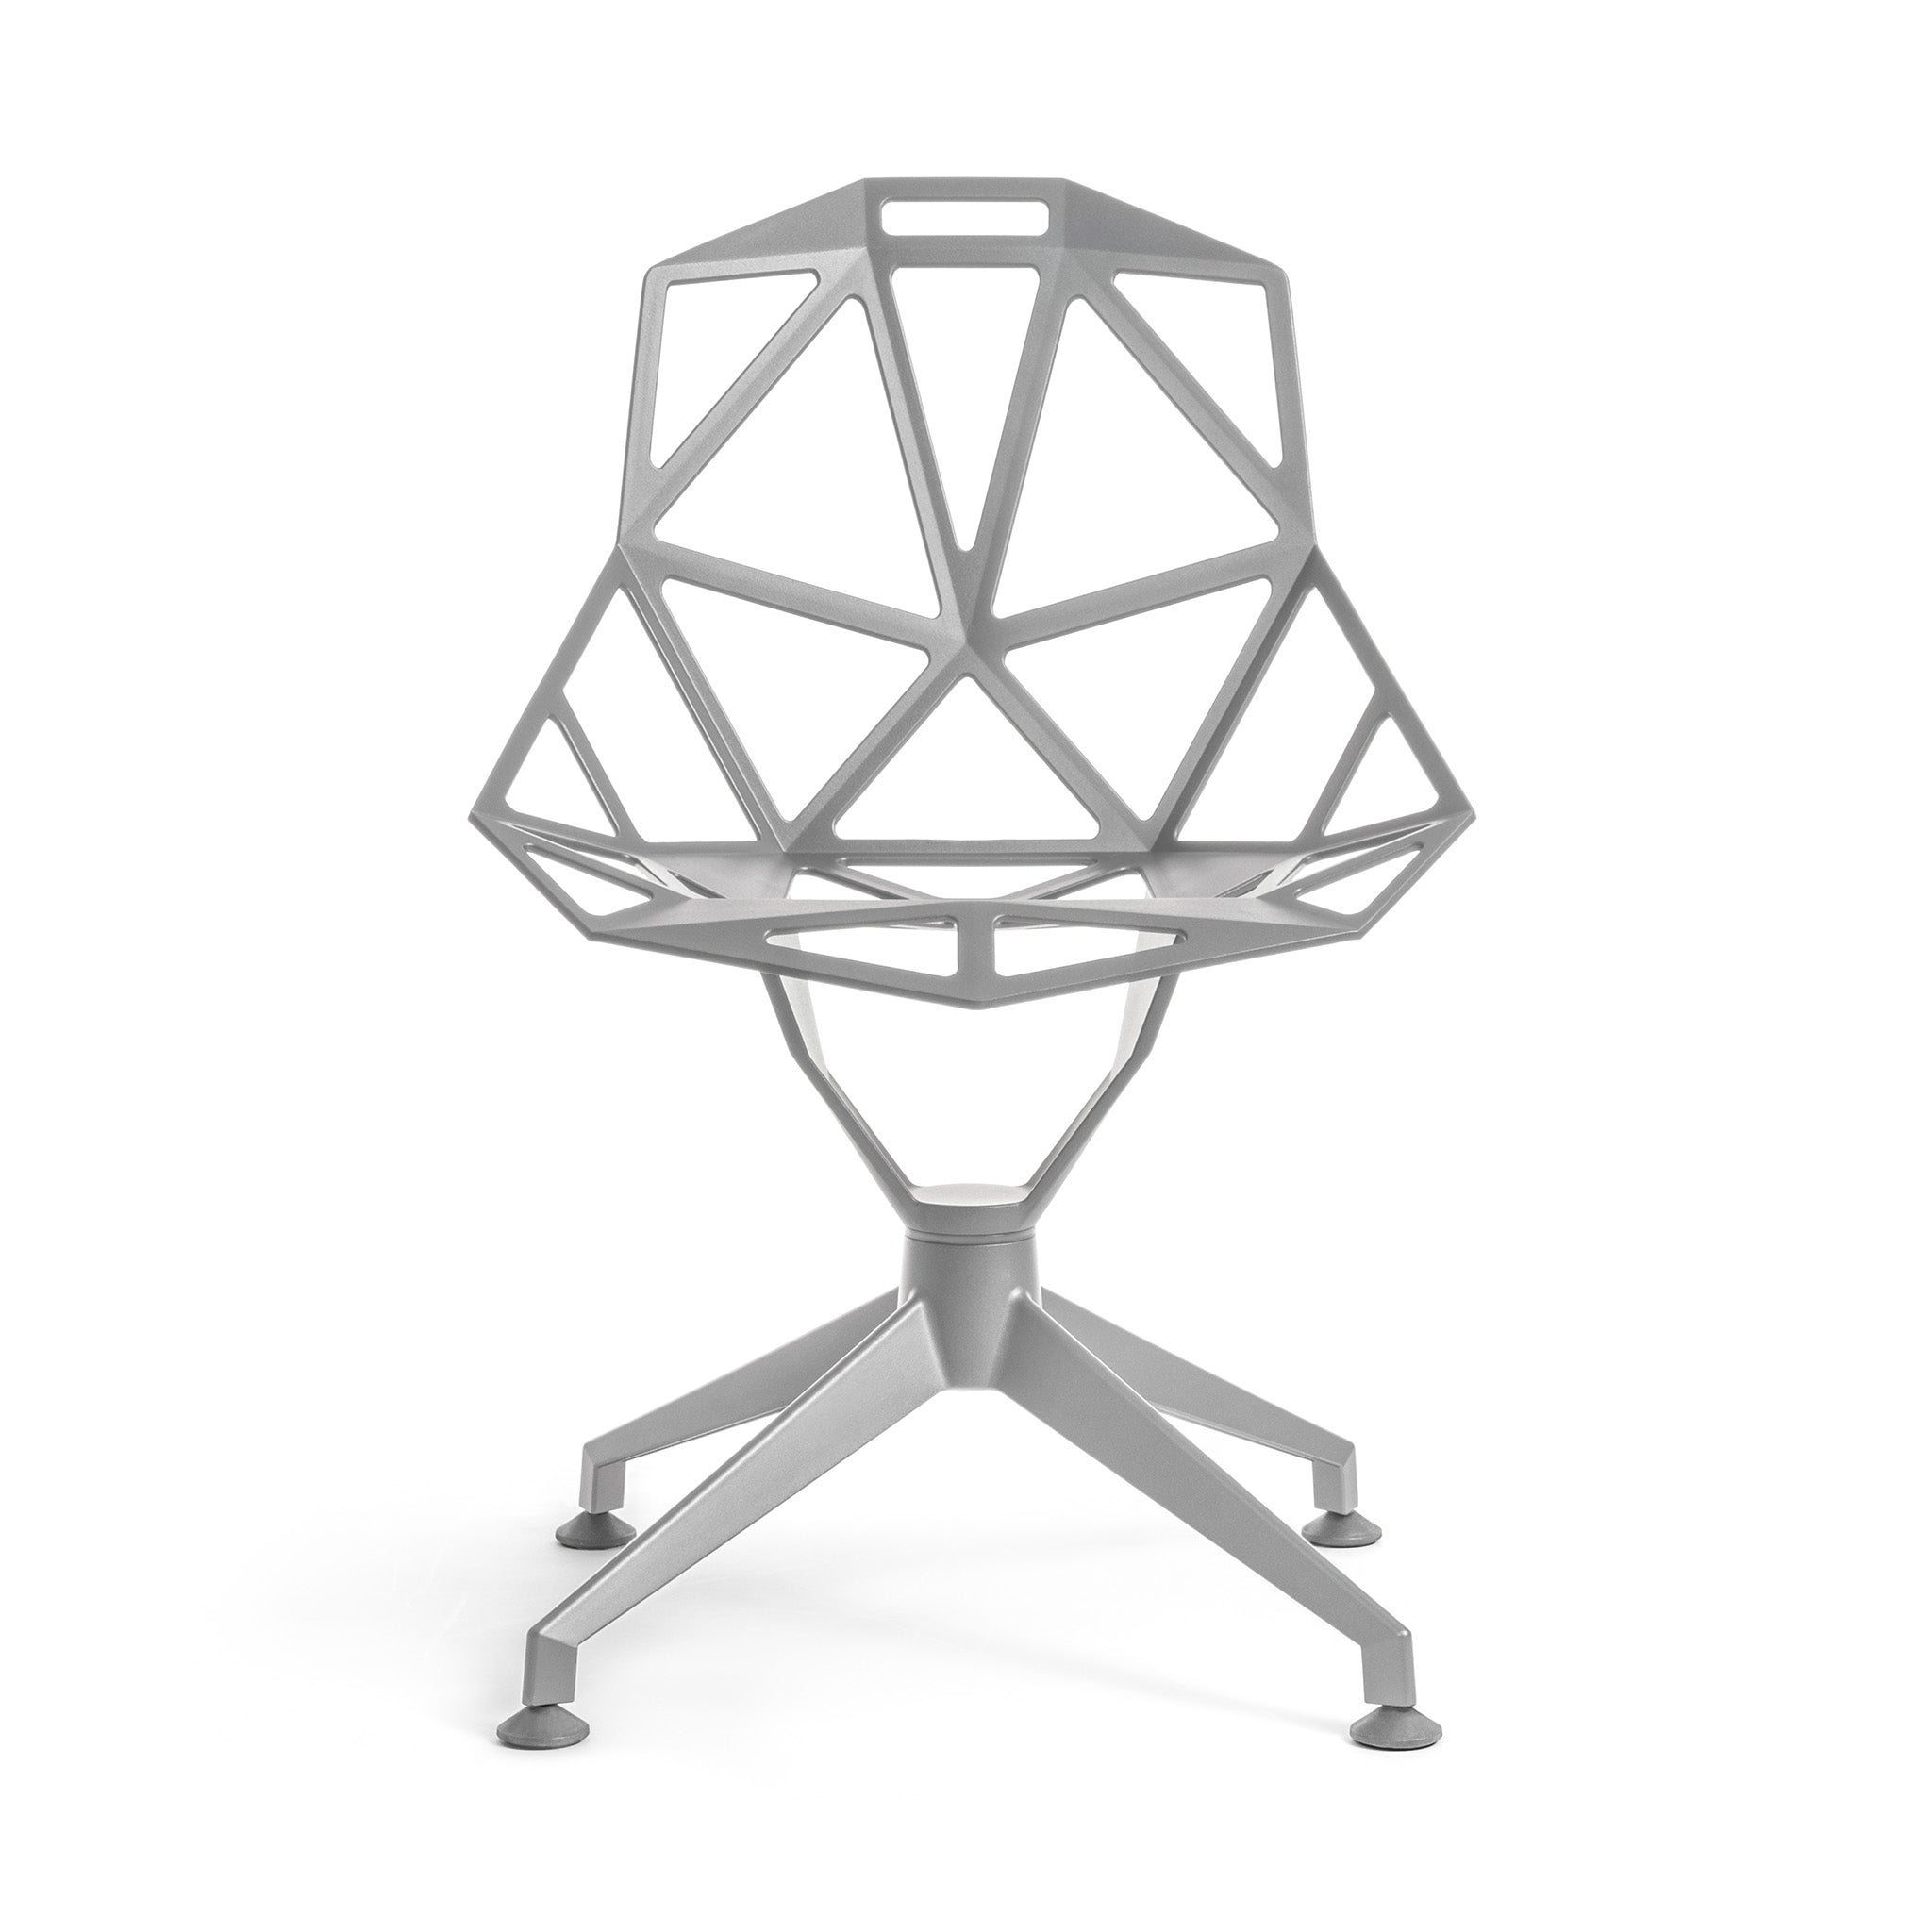 Chair One - 4 Star by Magis